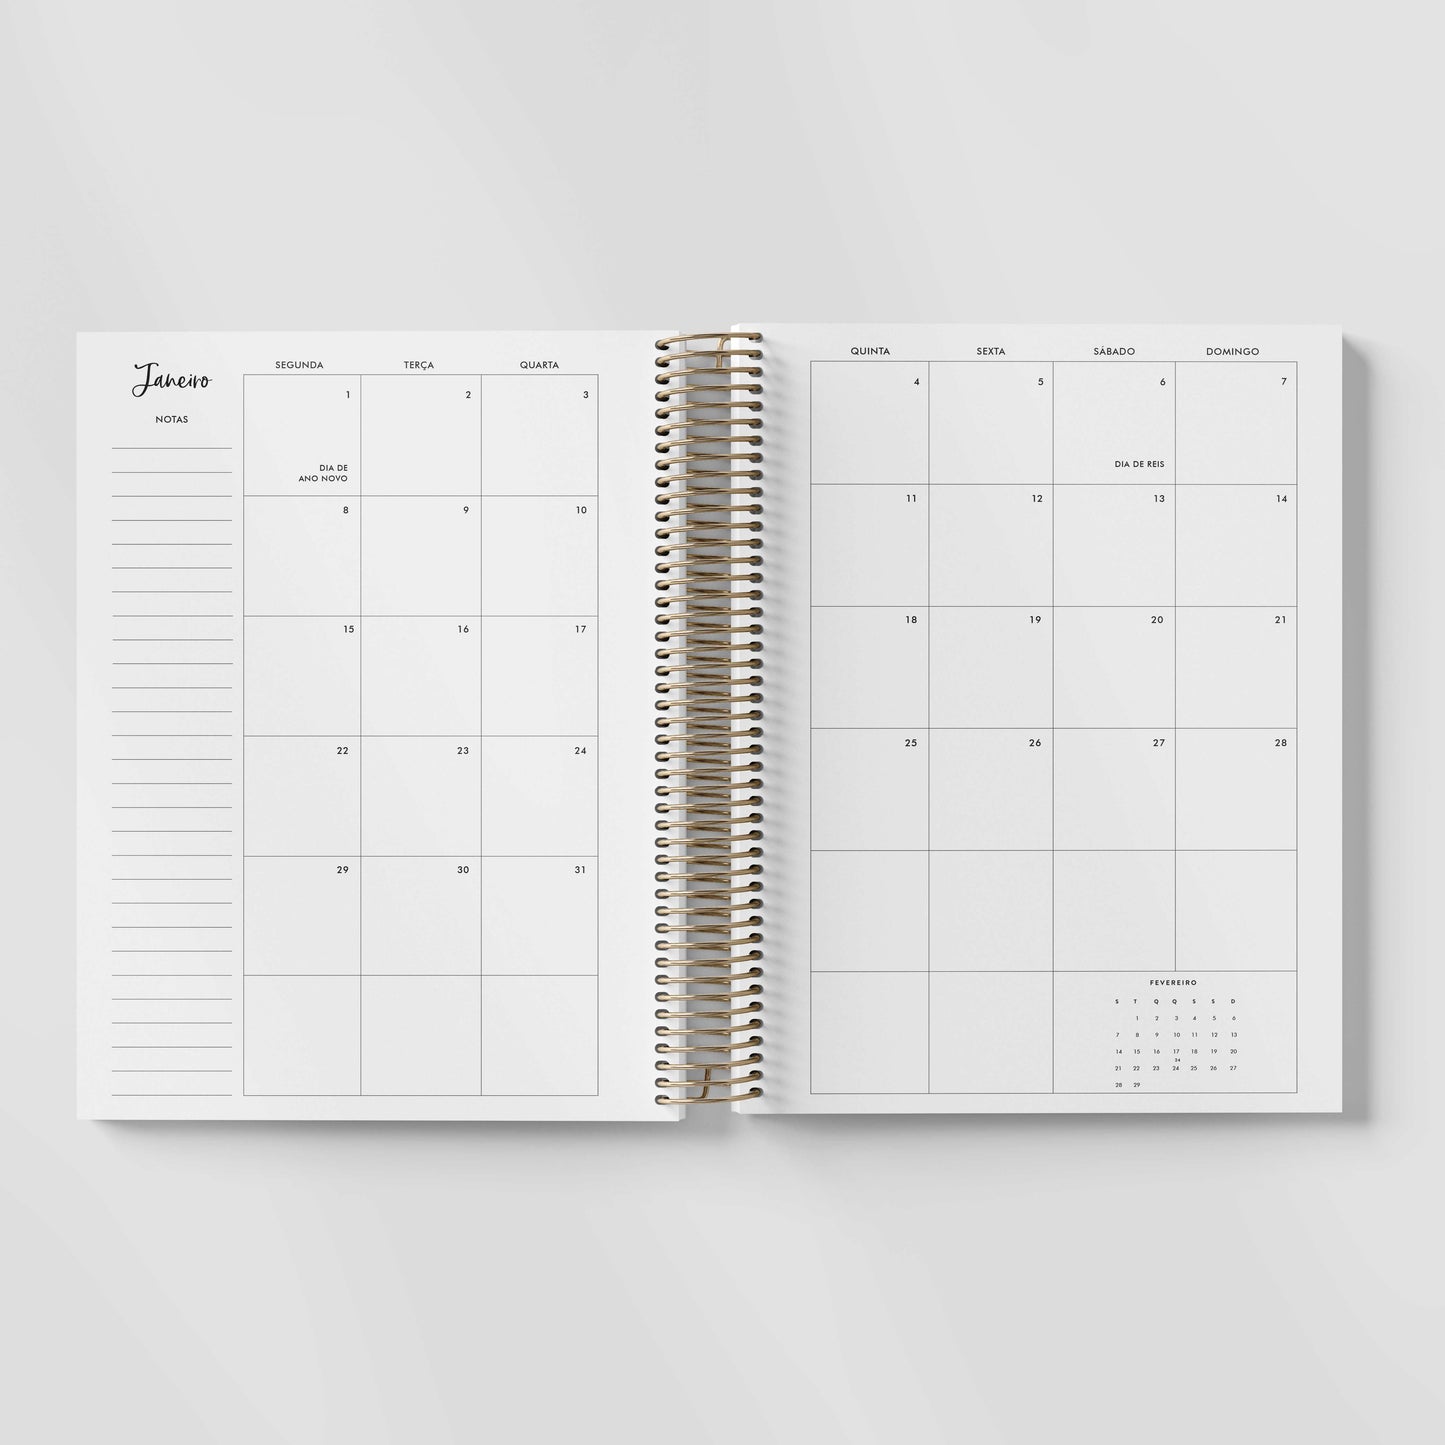 STRIPES + DAISY | LIFE PLANNER 2024 * 12 MONTH AGENDA * ESPECIAL HOLIDAY SALE *